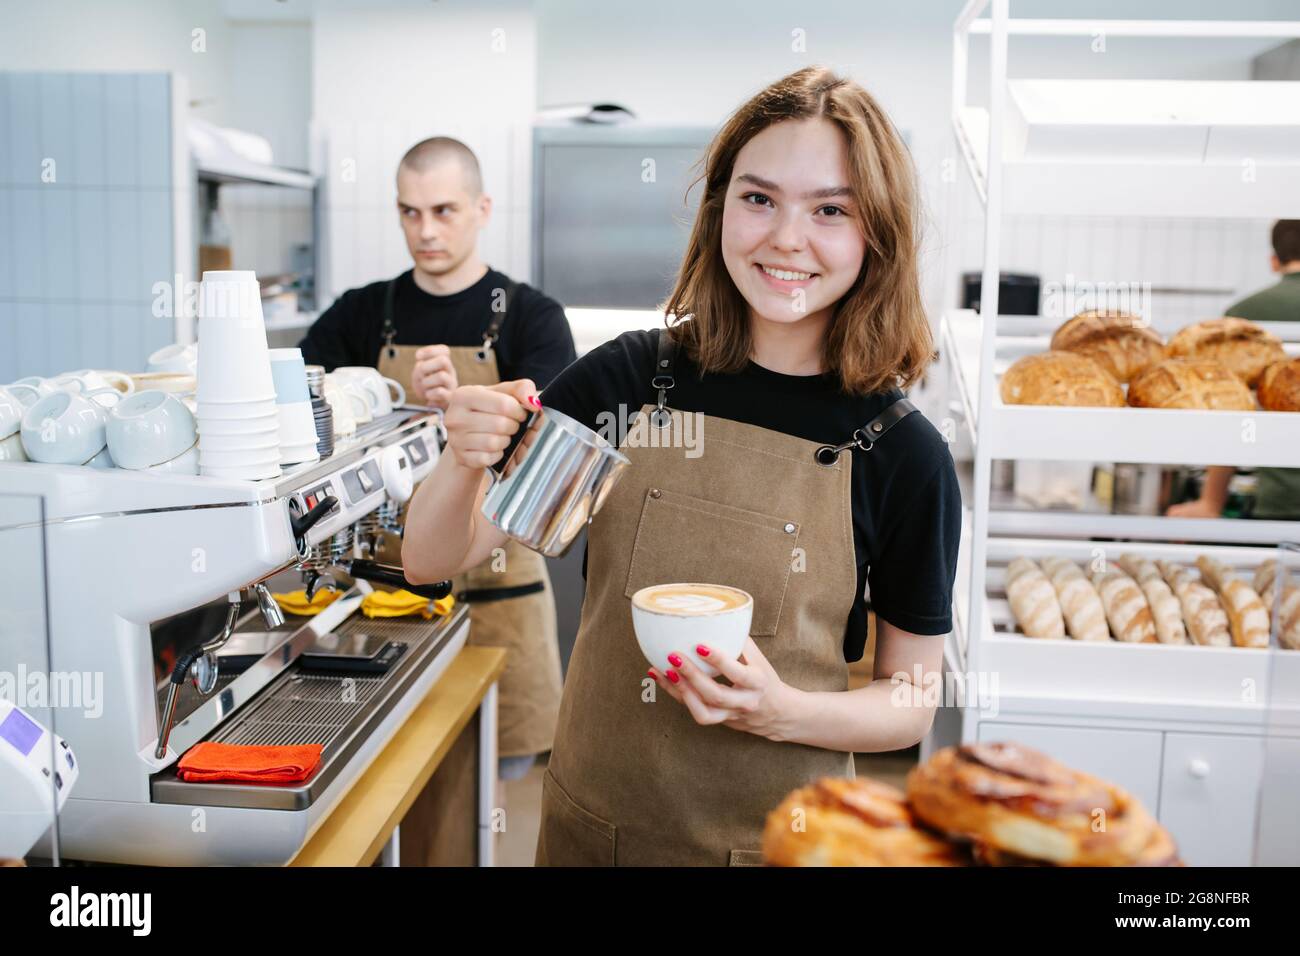 Young beautiful baker girl posing with coffee and cream jug in hands. Charmingly smiling at the camera. Inside a disorderly busy bakery kitchen. Stock Photo